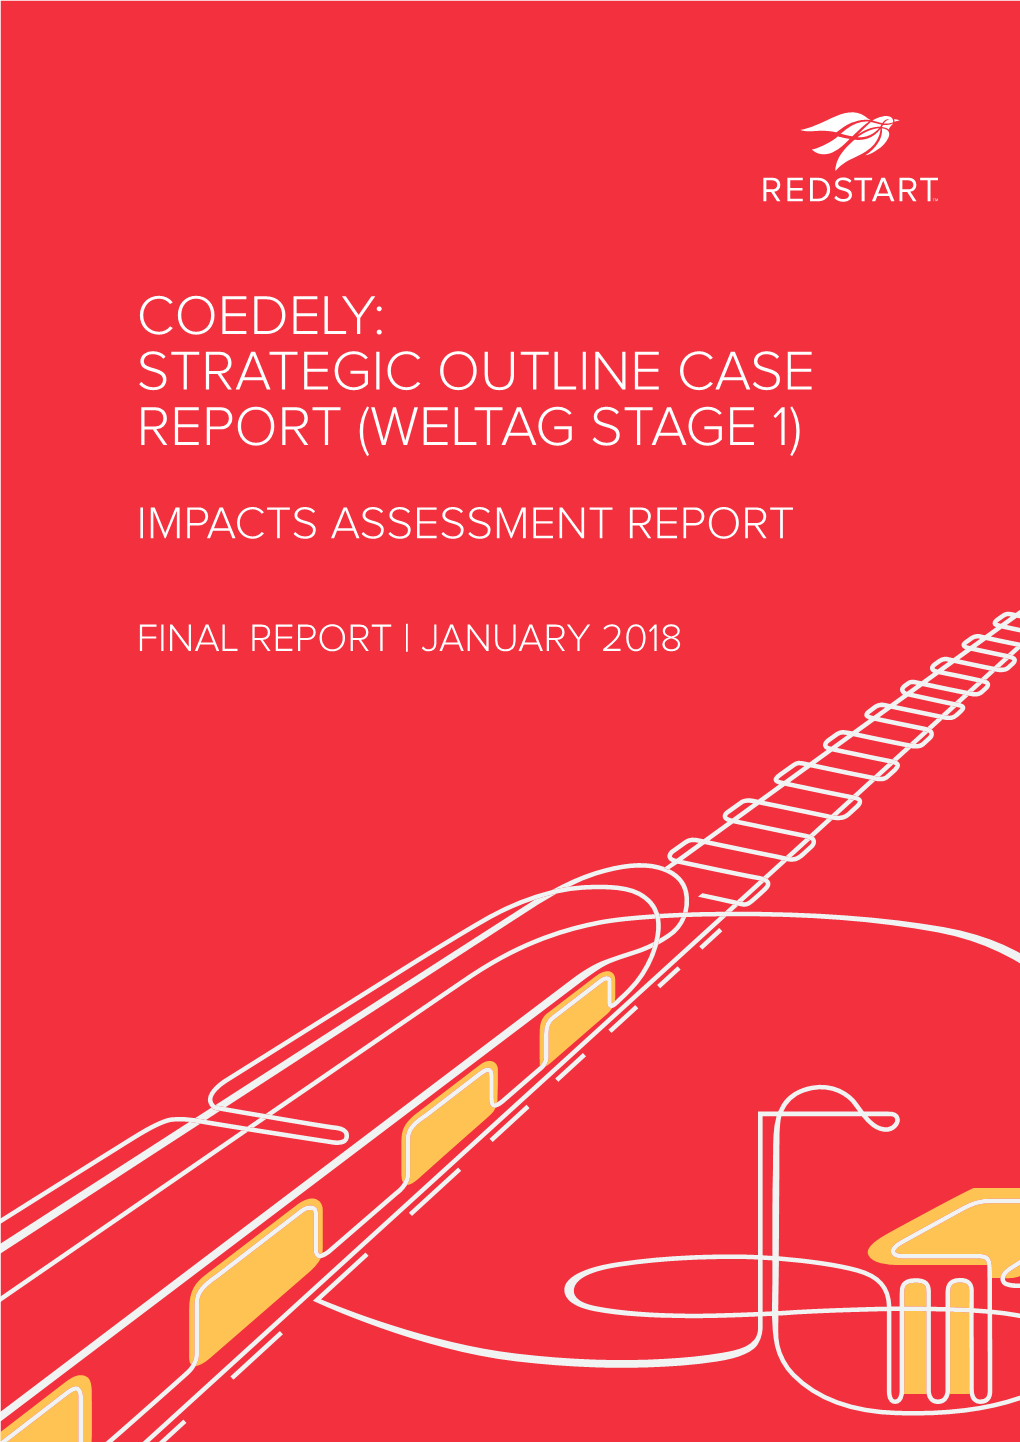 Coedely: Strategic Outline Case Report (Weltag Stage 1) Impacts Assessment Report